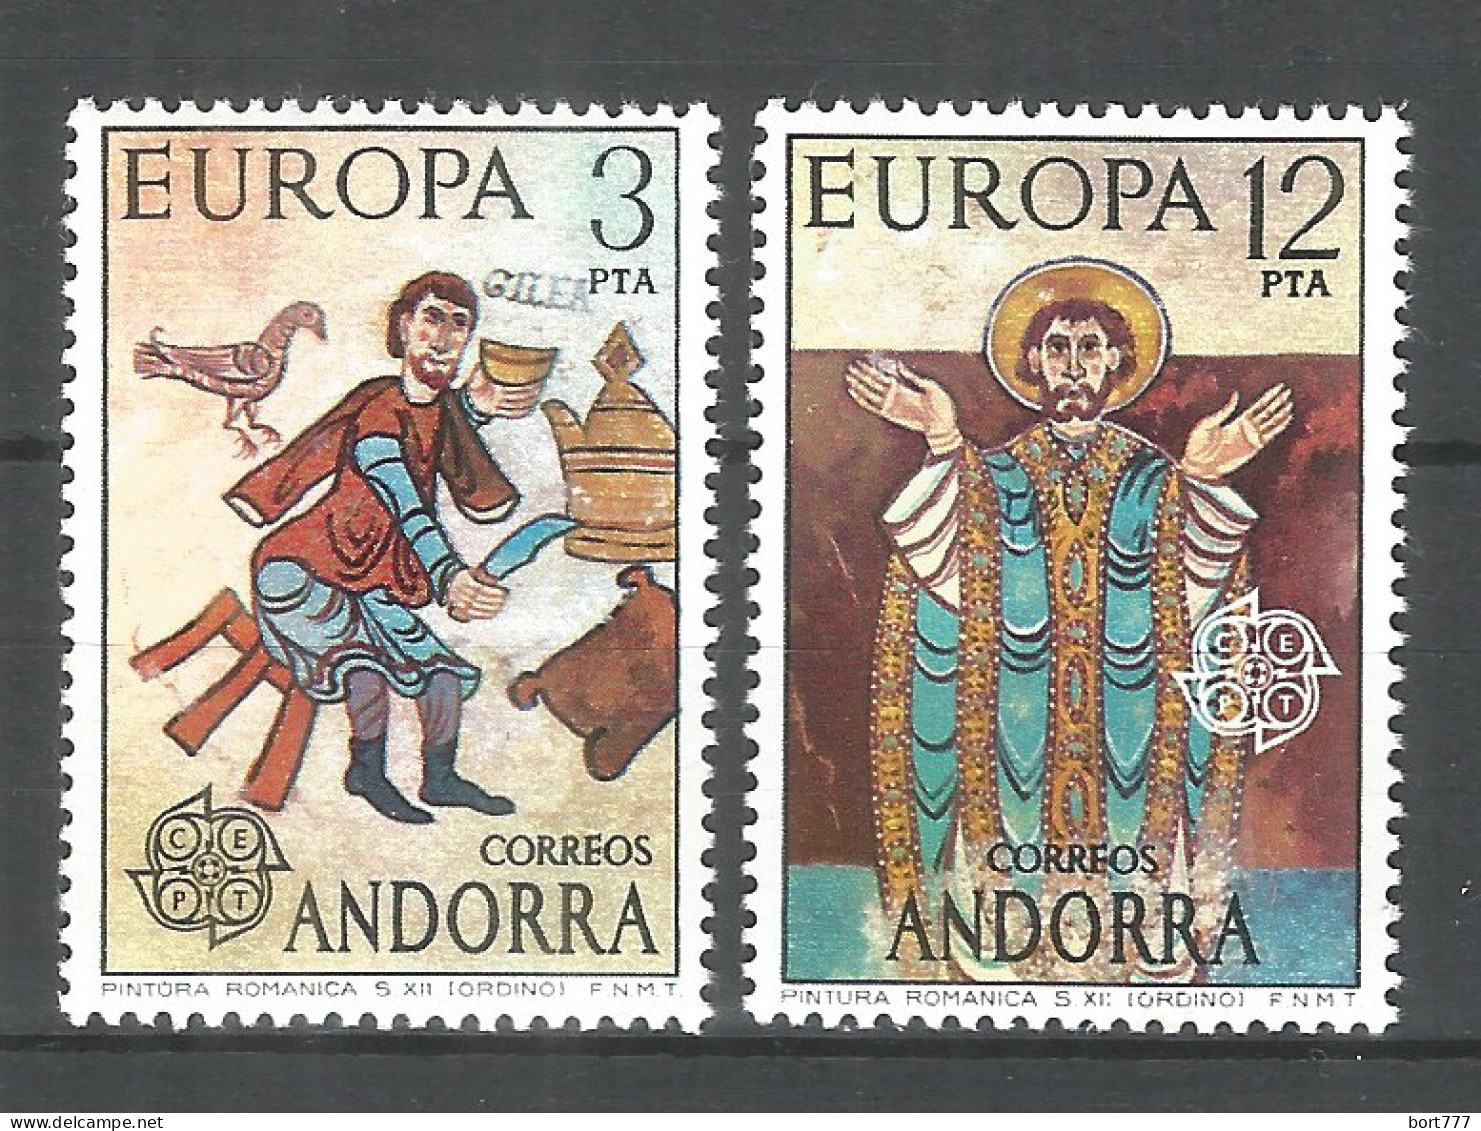 Spanish Andorra 1975 , Mint Stamps MNH (**) Europa Cept - Nuevos